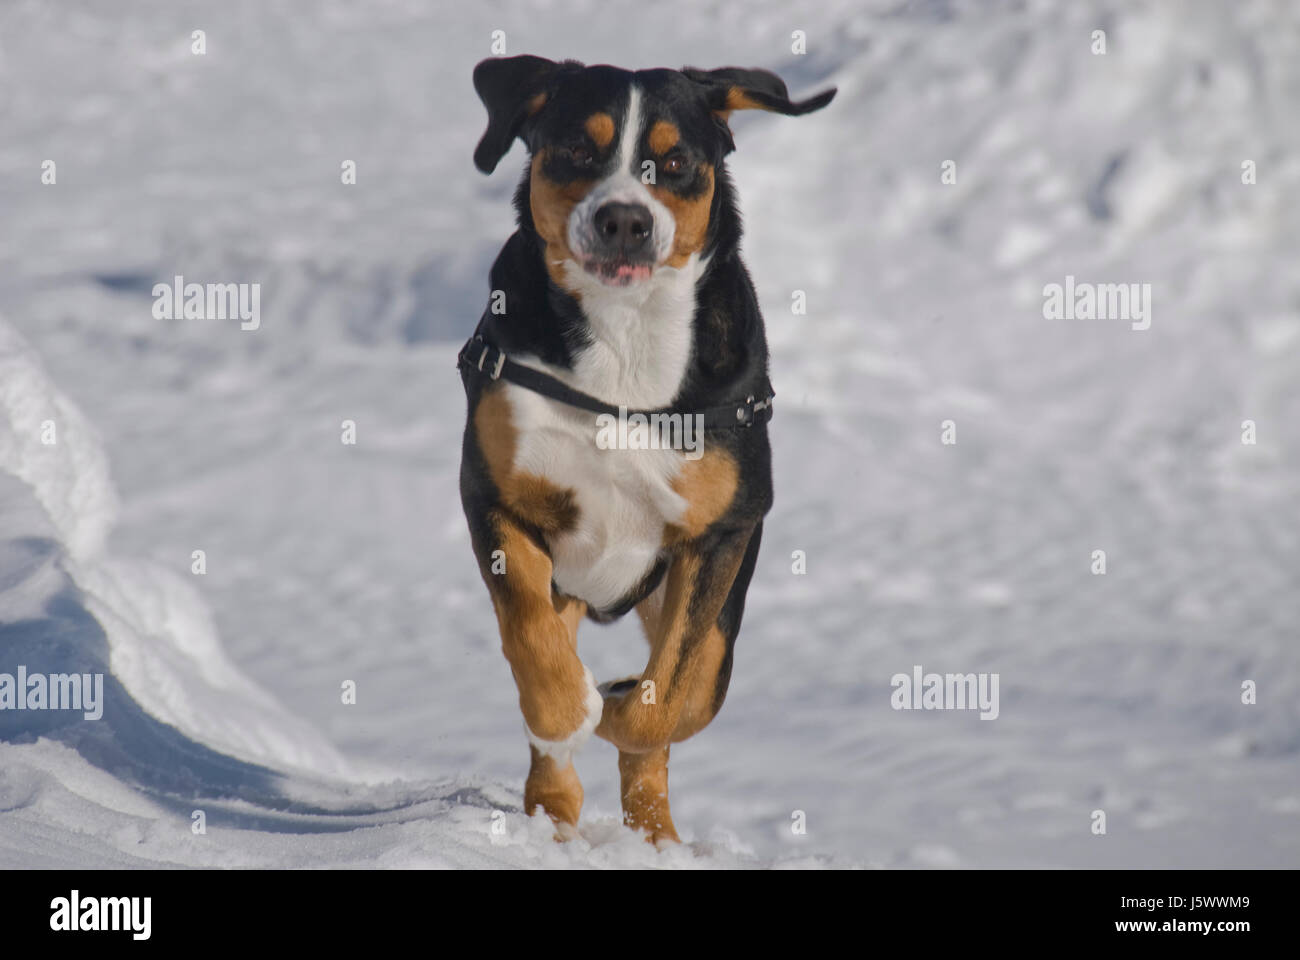 winter summer summerly dog rescue quest avalanche first assistance help support Stock Photo